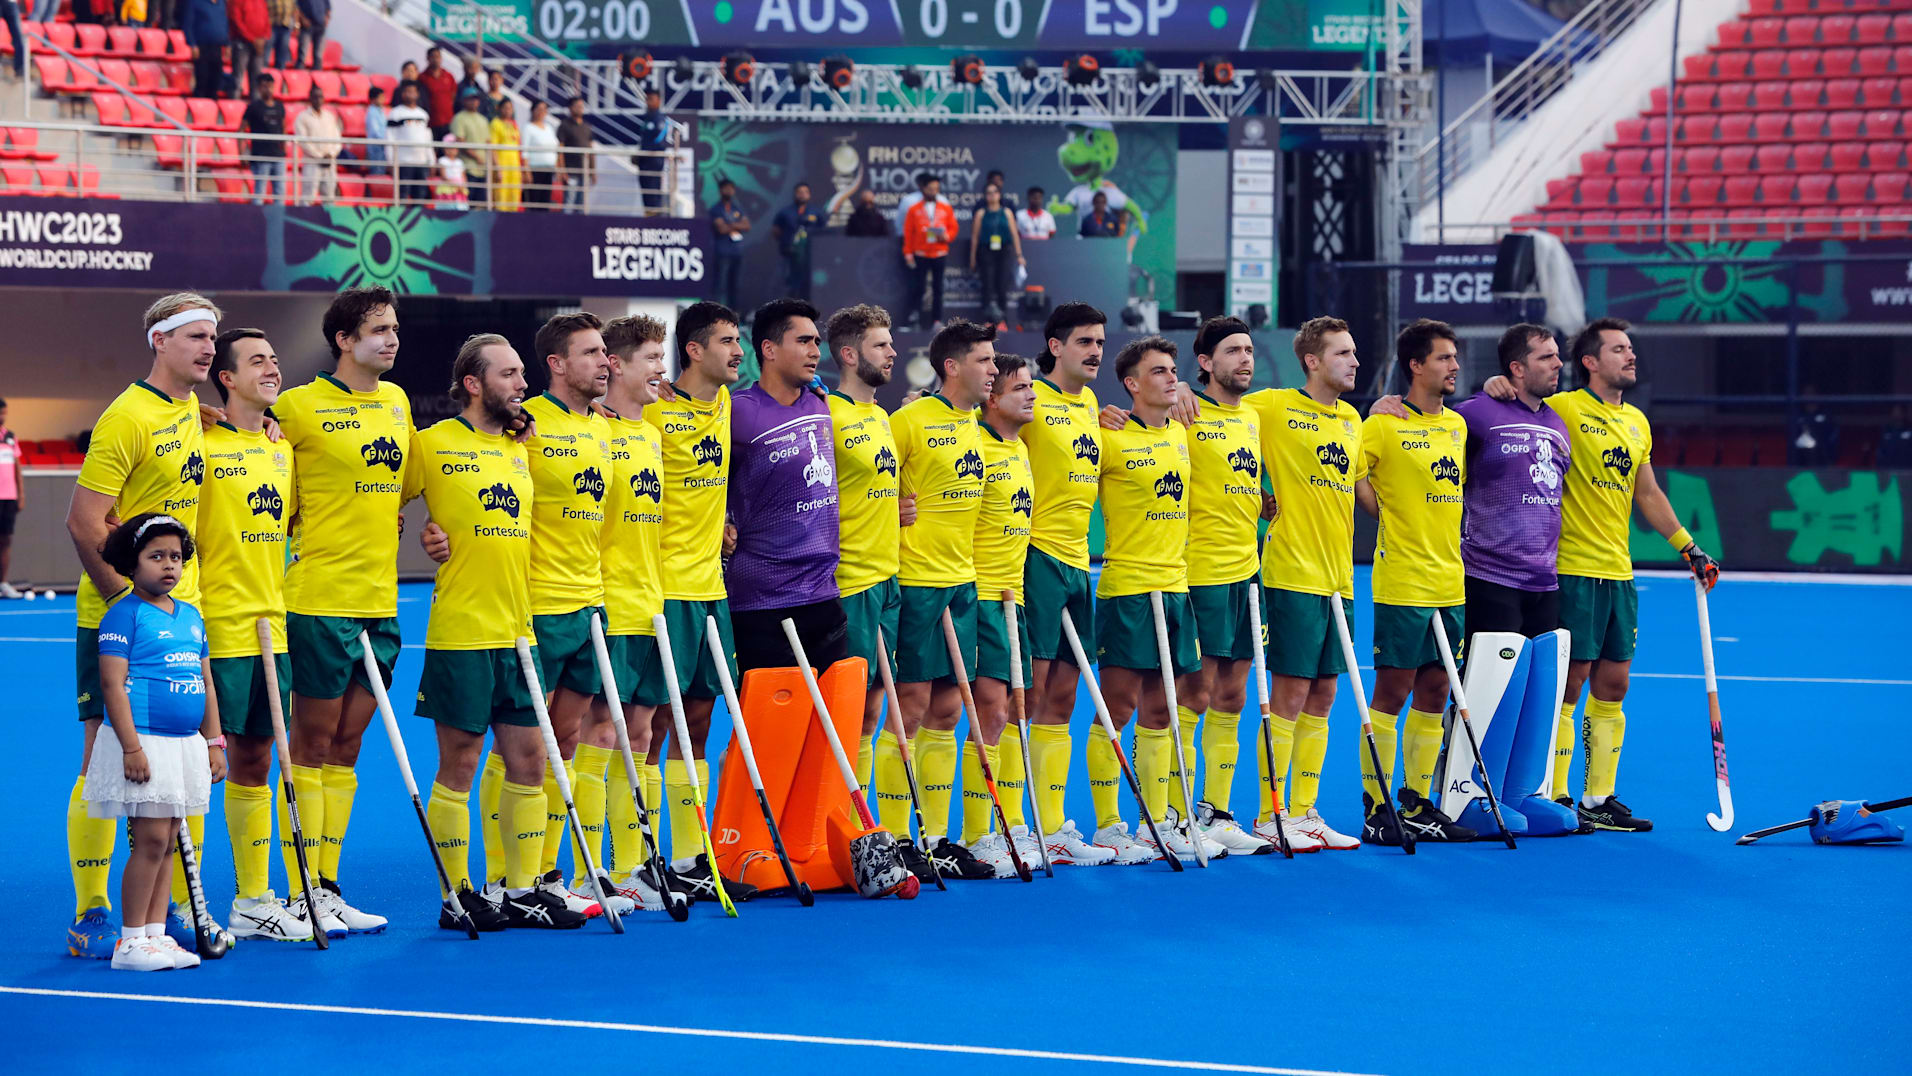 2023 Men's Hockey World Cup: Full hockey squads for all nations